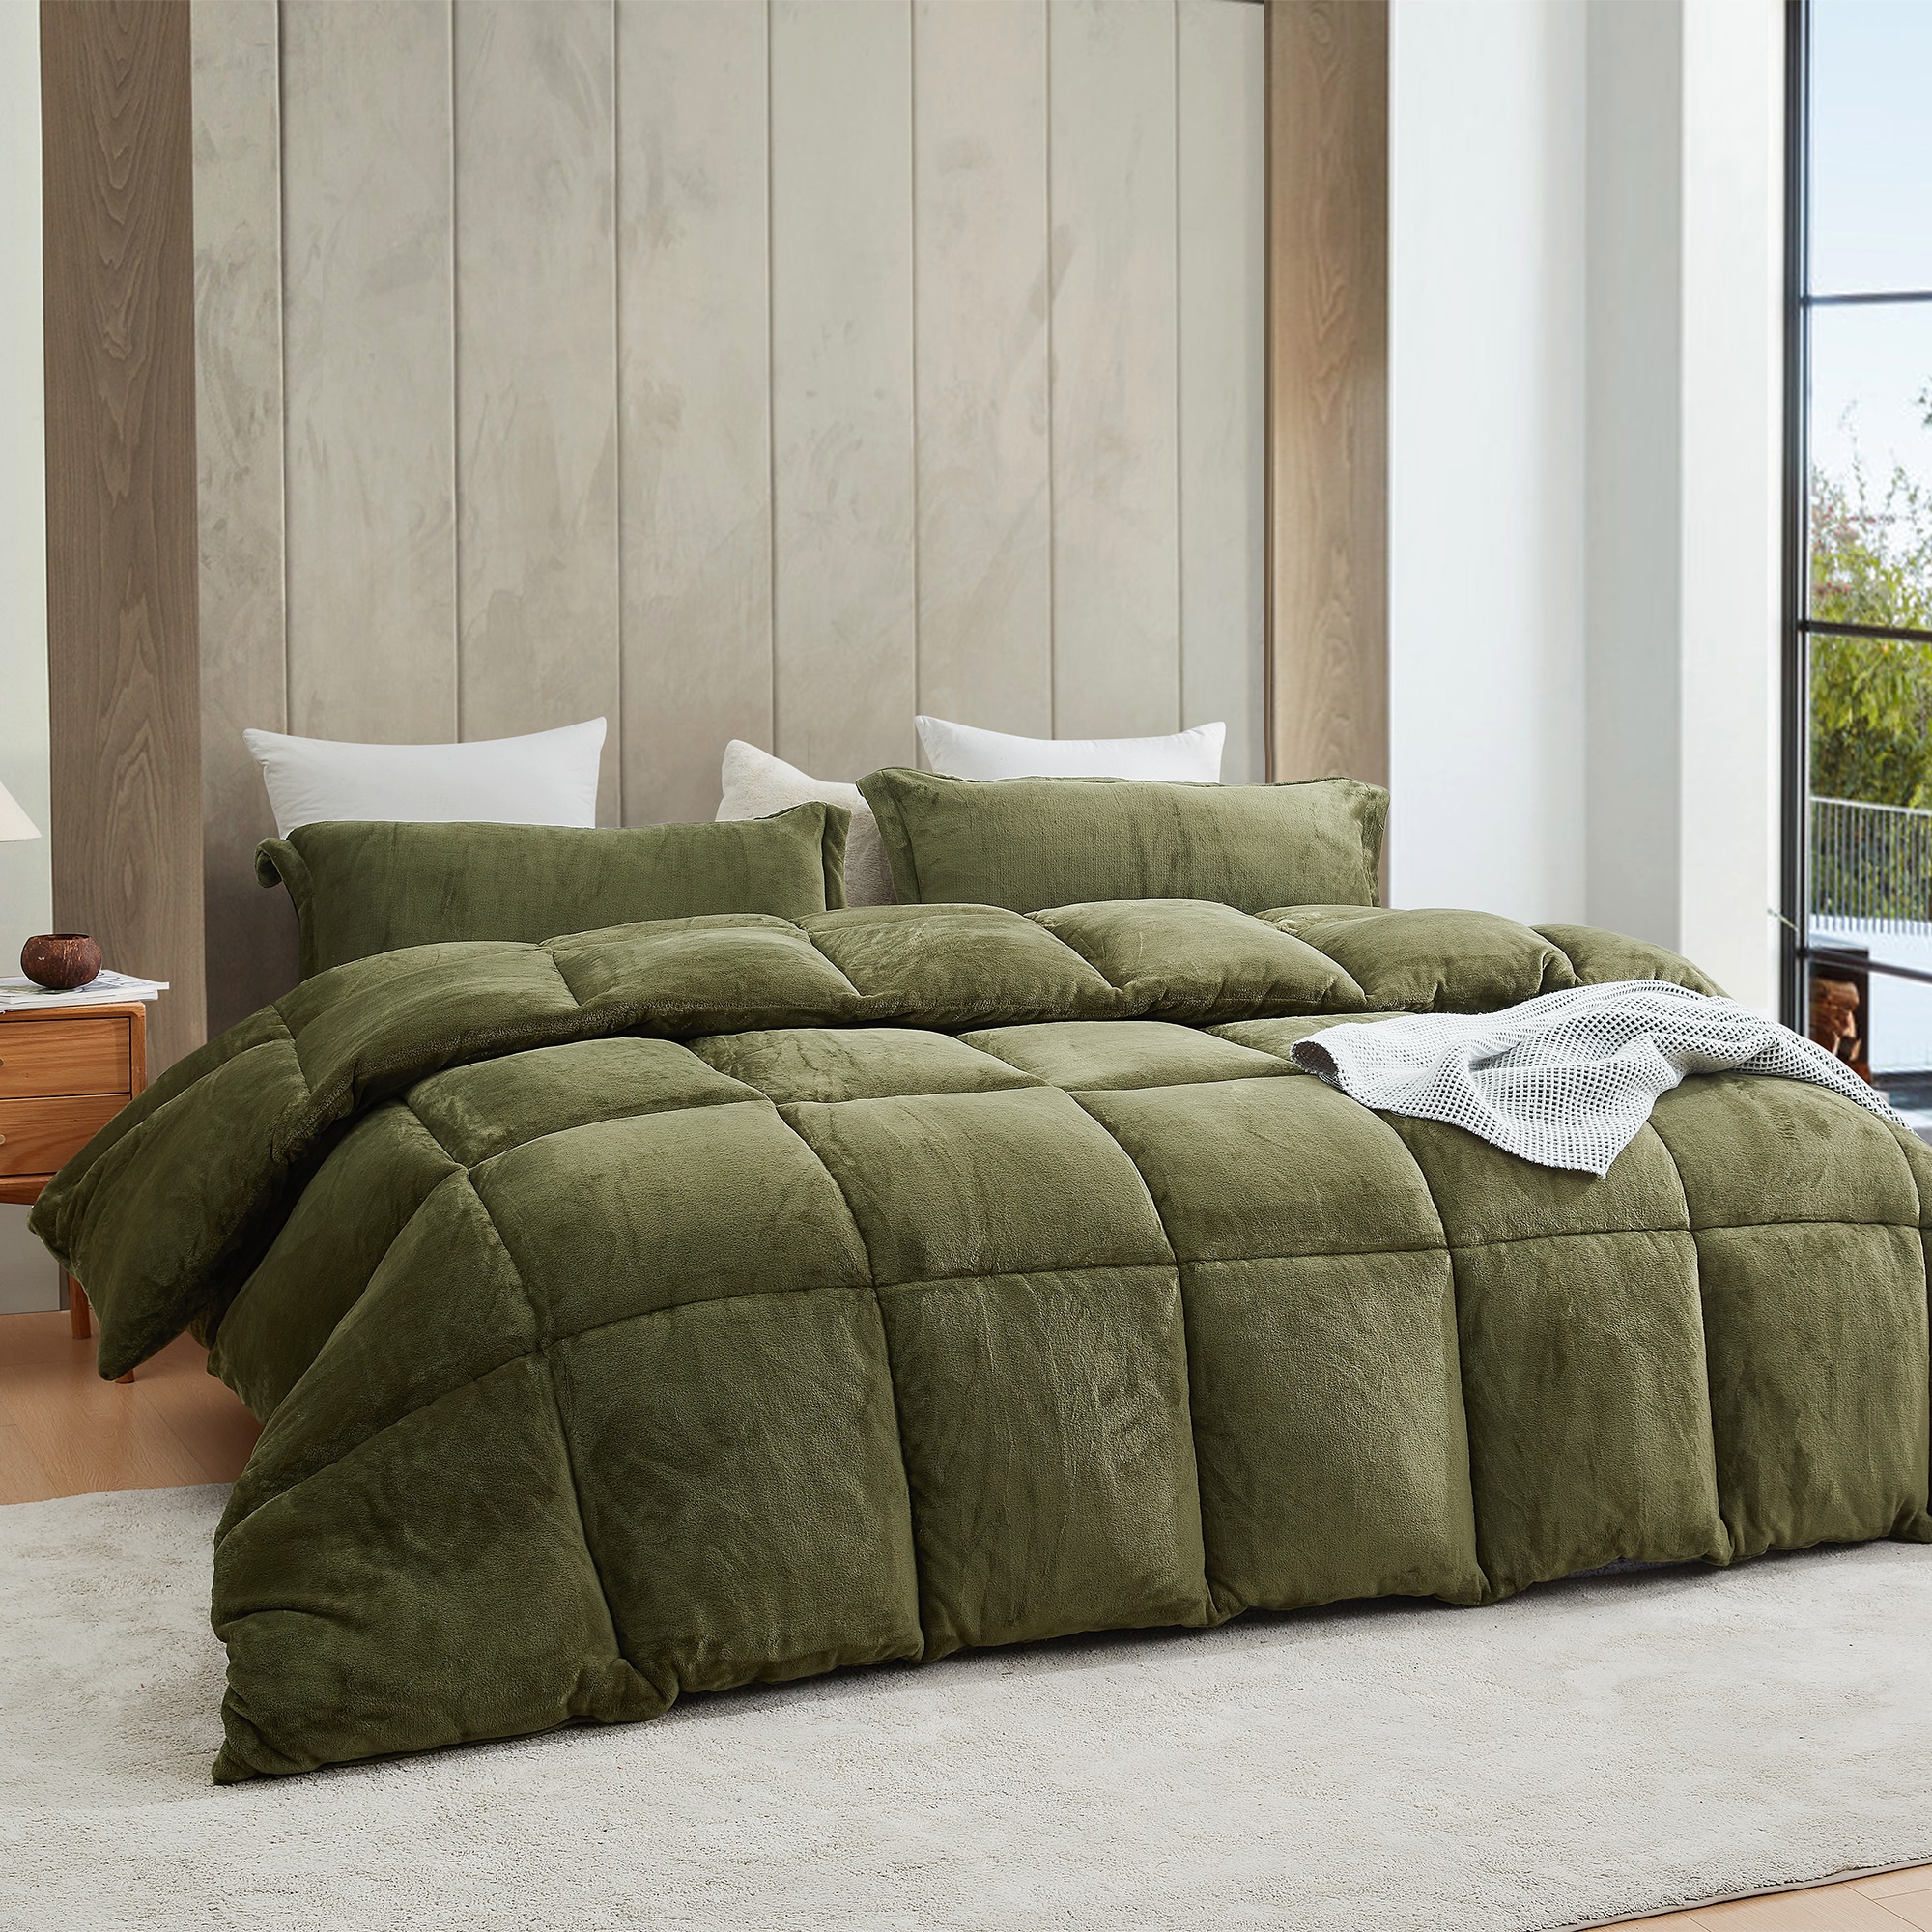 Thicker Than Thick - Coma Inducer Comforter - Down Alternative Ultra Plush Filling - Winter Moss